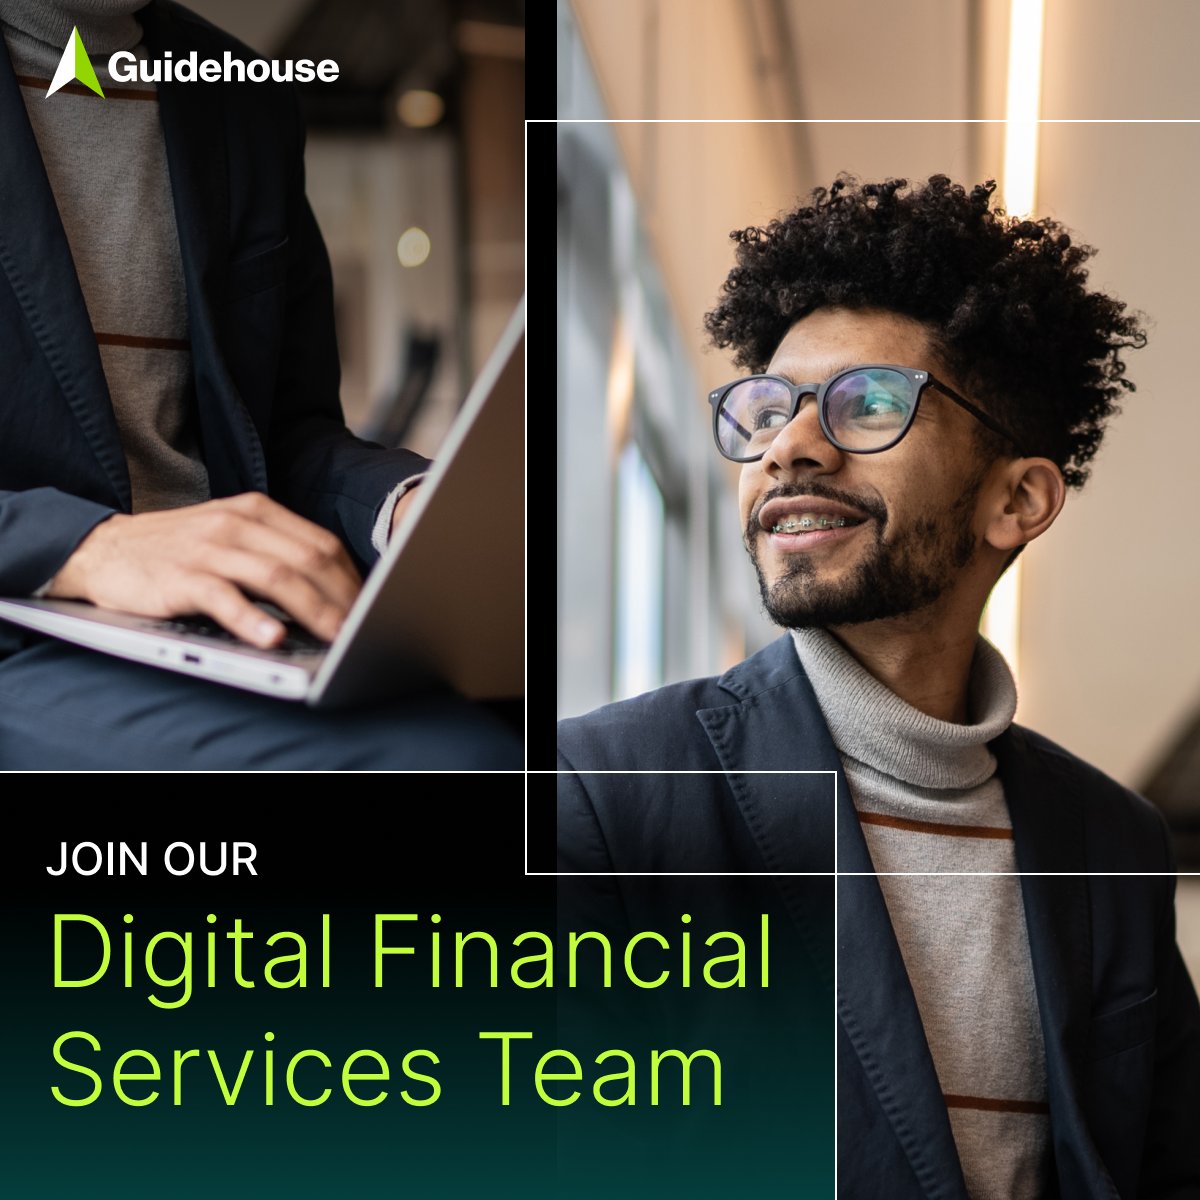 Are you looking for a job? @Guidehouse is hiring! Discover more and start your application today:  guidehou.se/3QkIPZT

#DigitalJobs #TechnologyJobs #ConsultingJobs #FinanceJobs #ITJobs